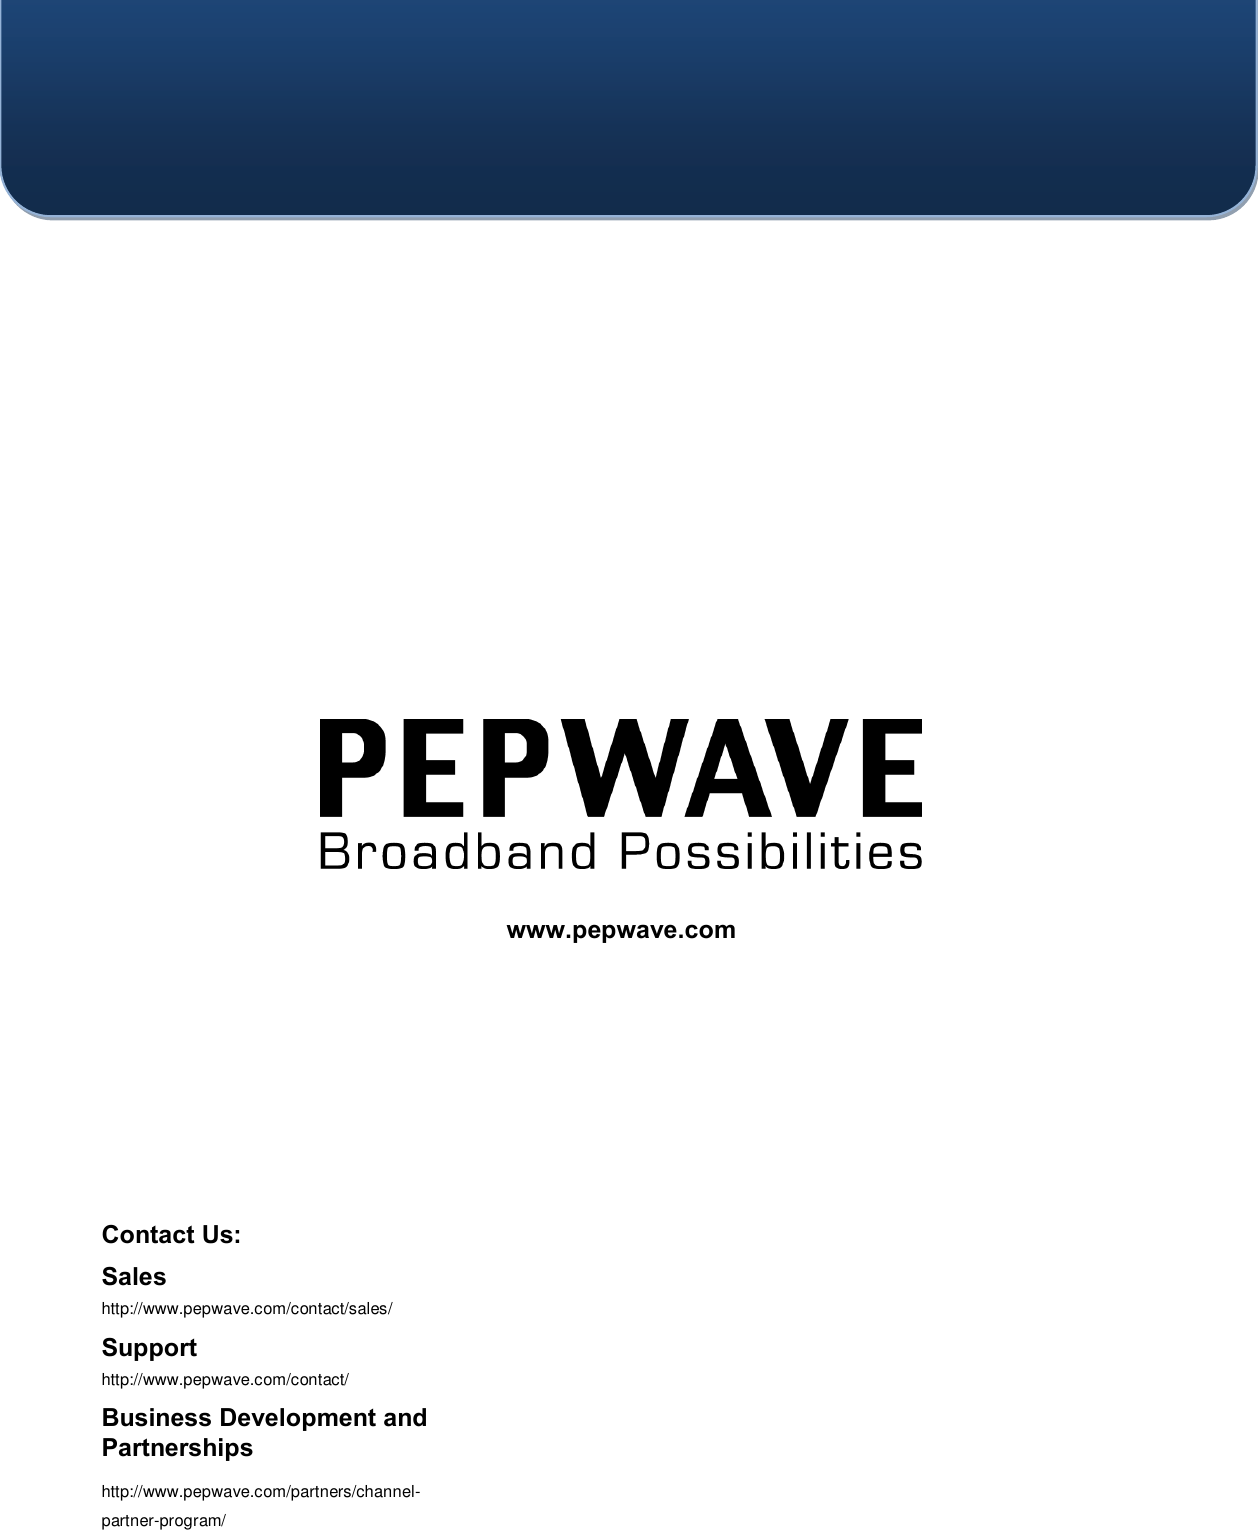       Contact Us:   Sales http://www.pepwave.com/contact/sales/ Support http://www.pepwave.com/contact/ Business Development and Partnerships http://www.pepwave.com/partners/channel-partner-program/ www.pepwave.com  